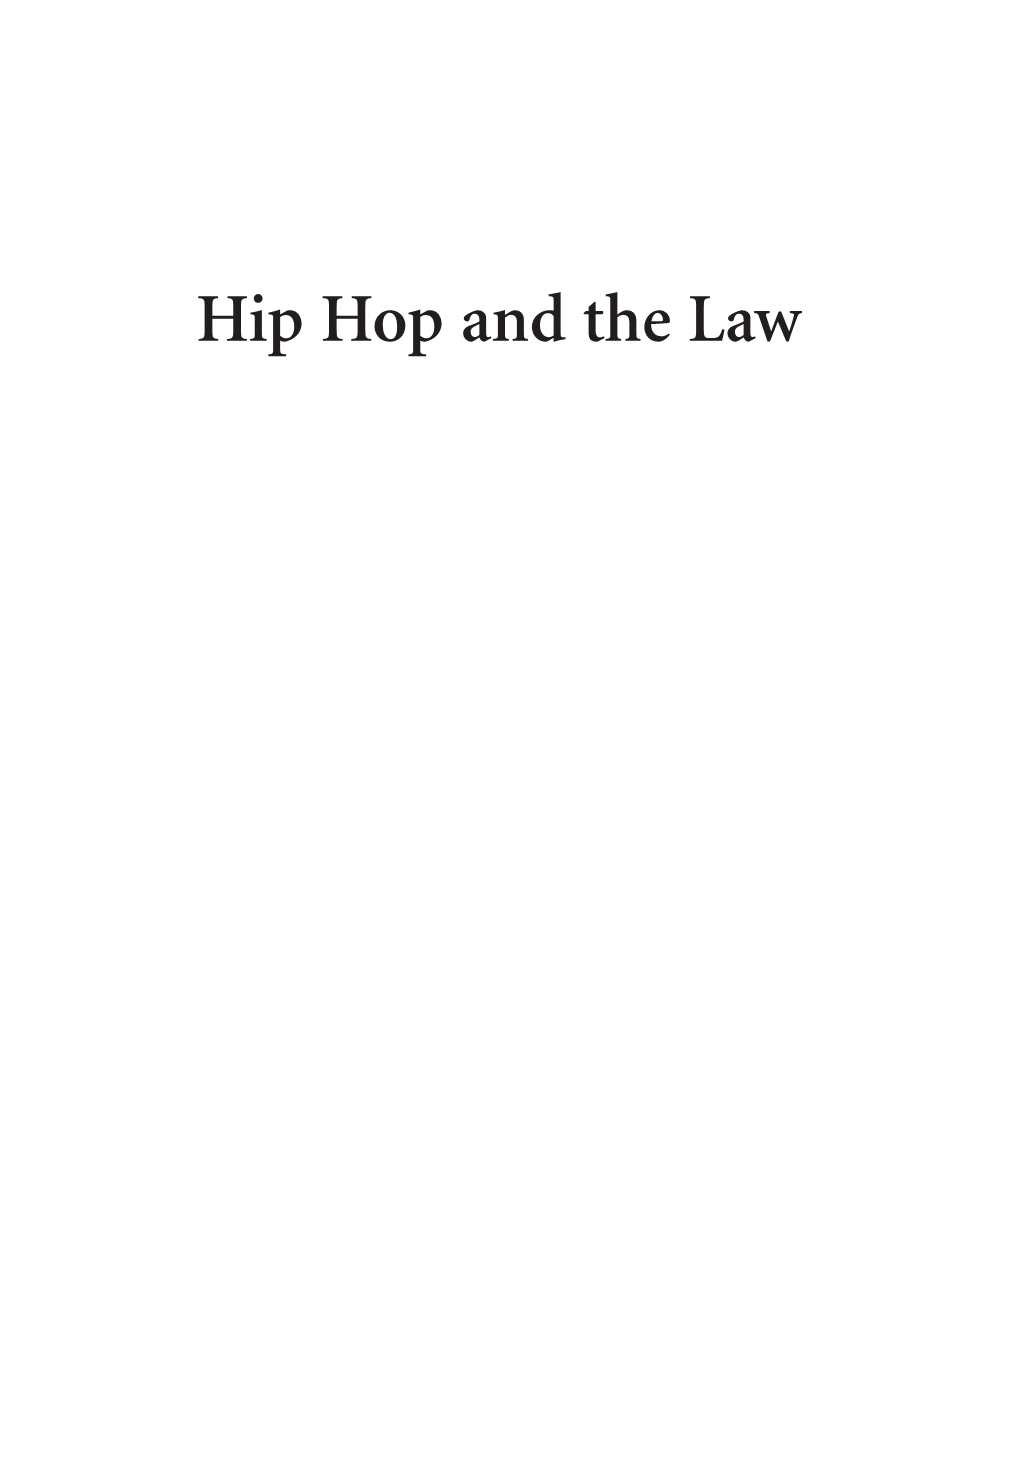 Hip Hop and the Law Bridgewater 00 Fmt 7/7/15 5:36 PM Page Ii Bridgewater 00 Fmt 7/7/15 5:36 PM Page Iii